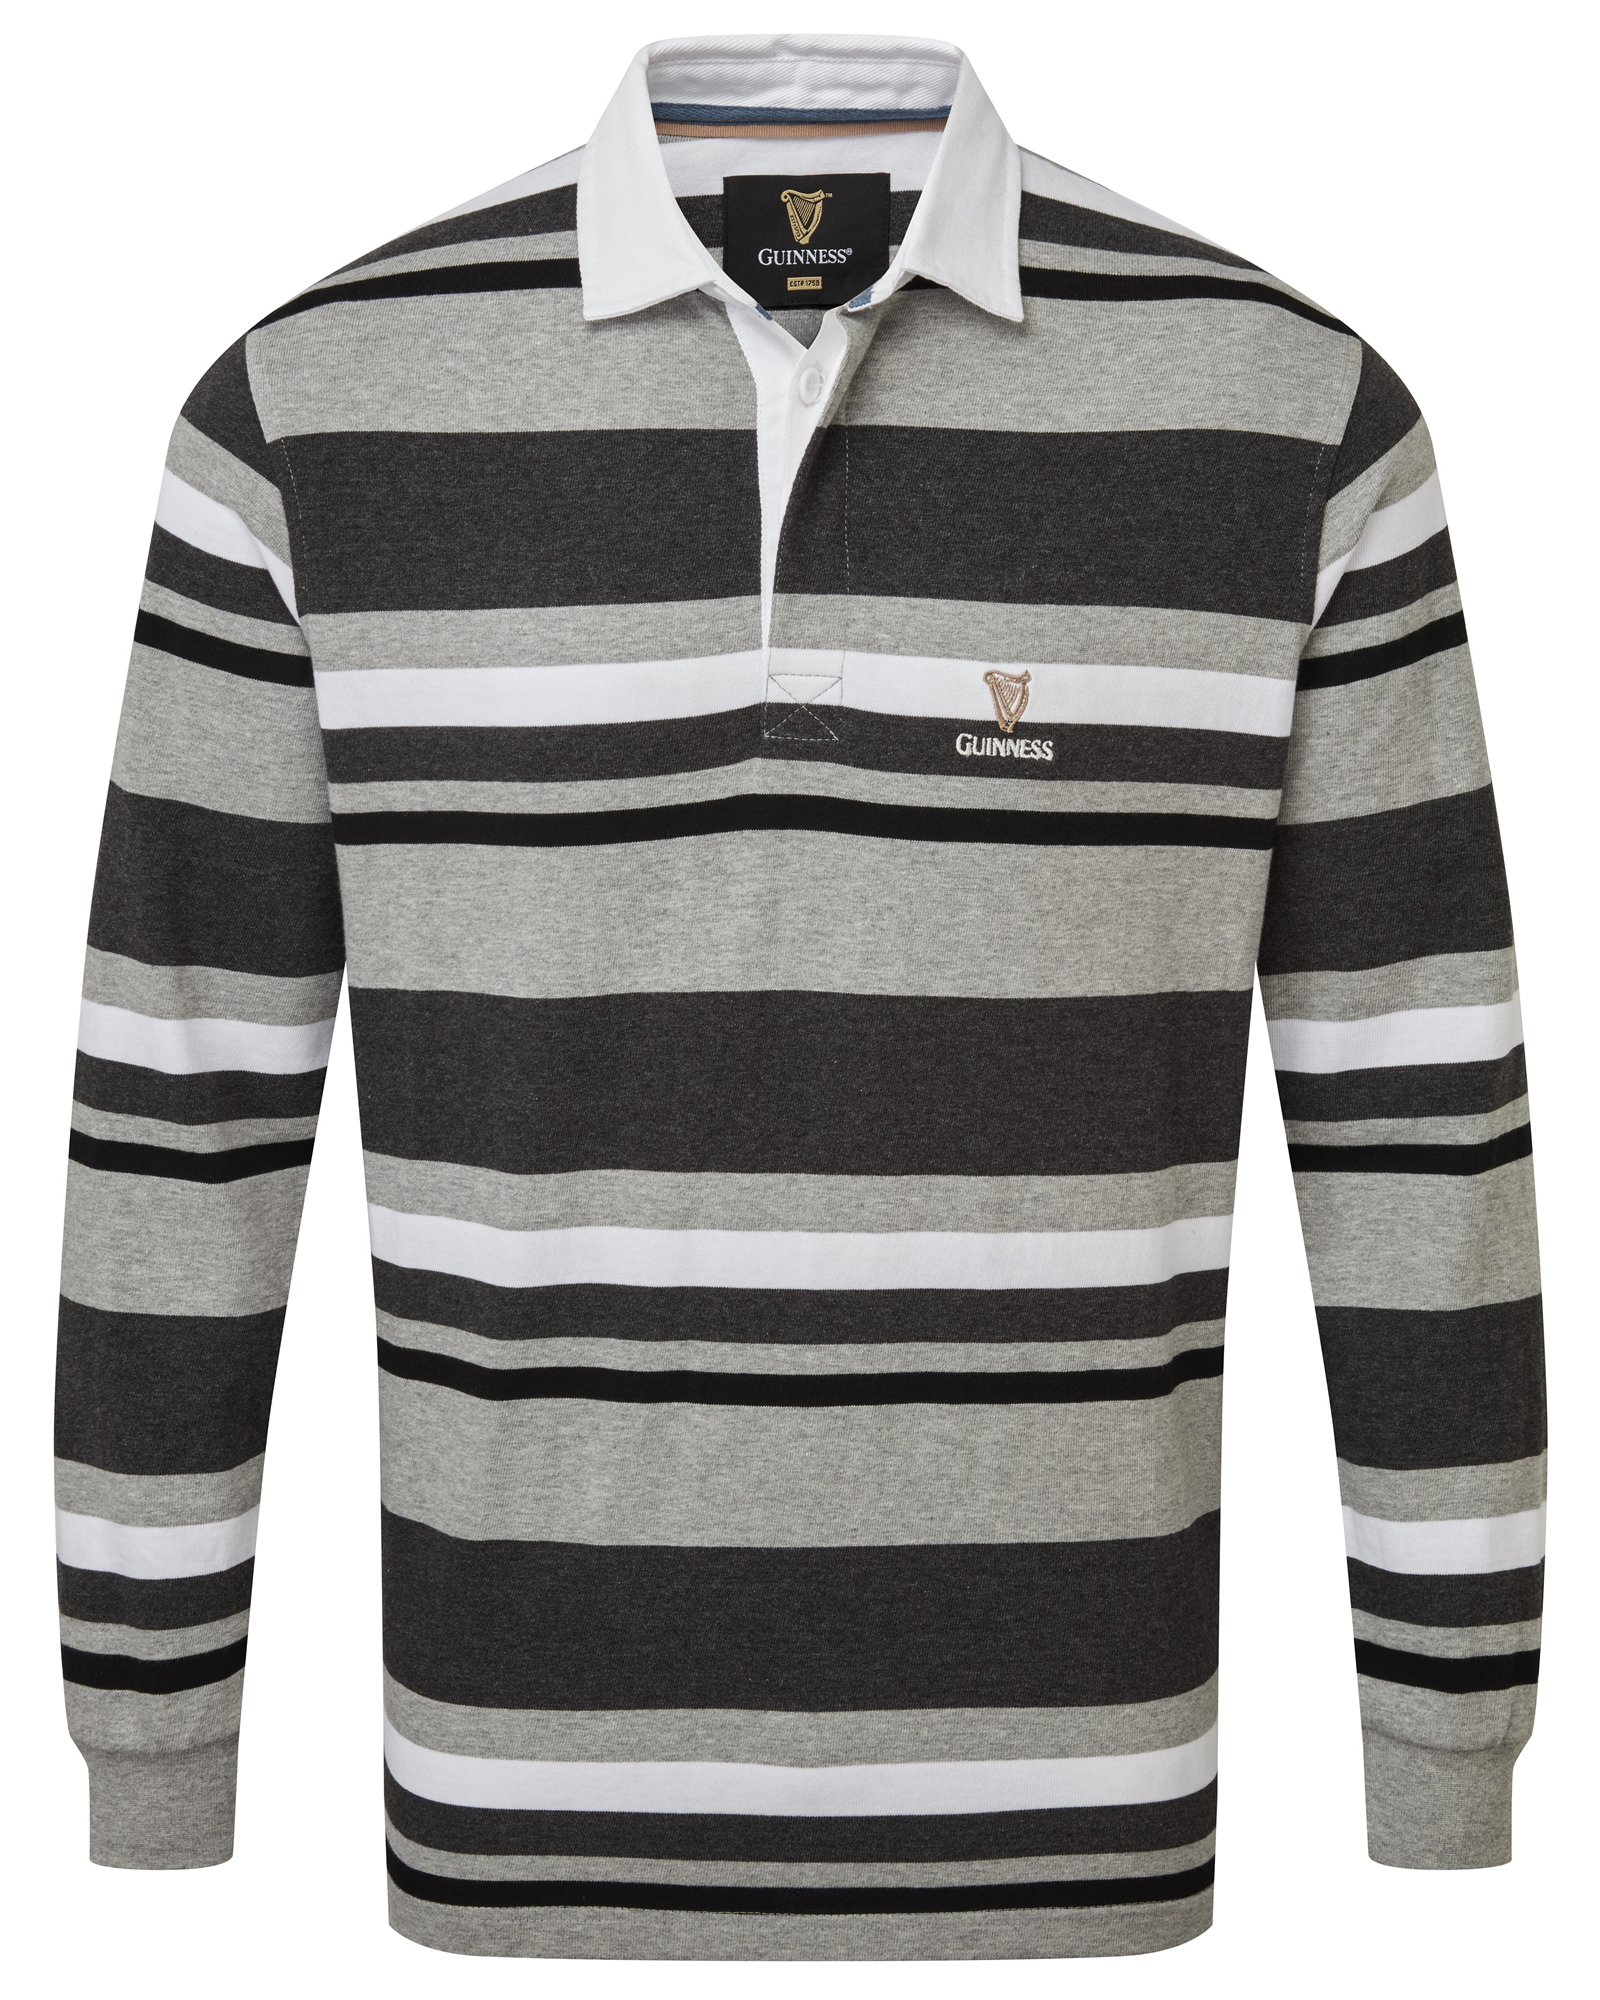 Featured image of post Black And White Striped Rugby Shirt : Striped rugby shirts and striped tees!